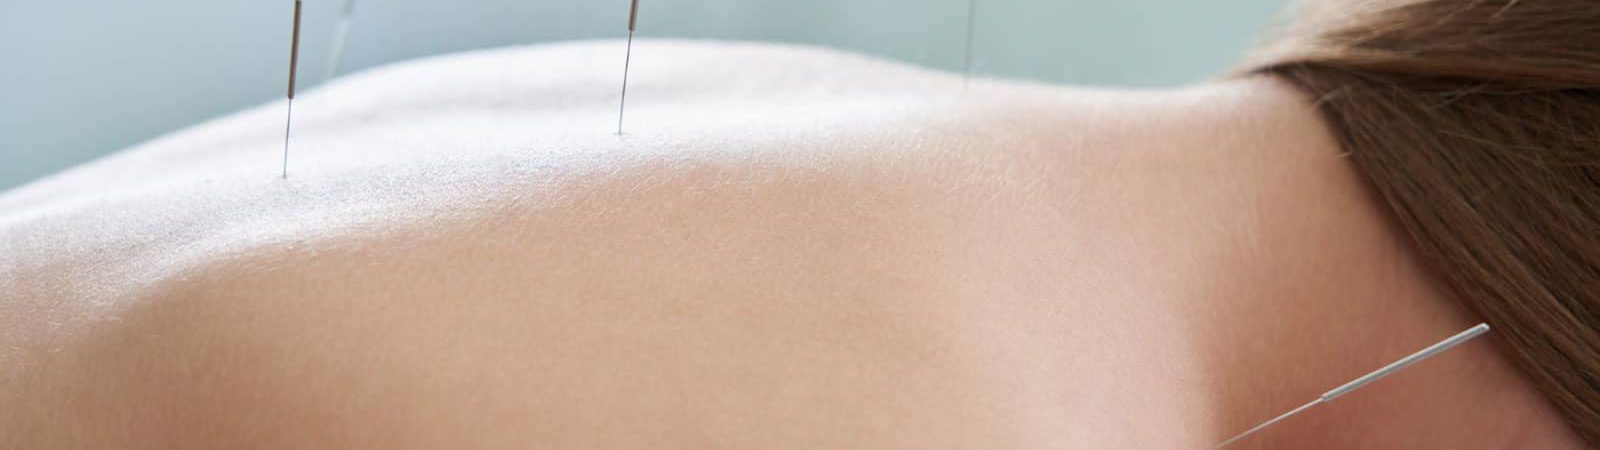 purchase acupuncture gift certificate